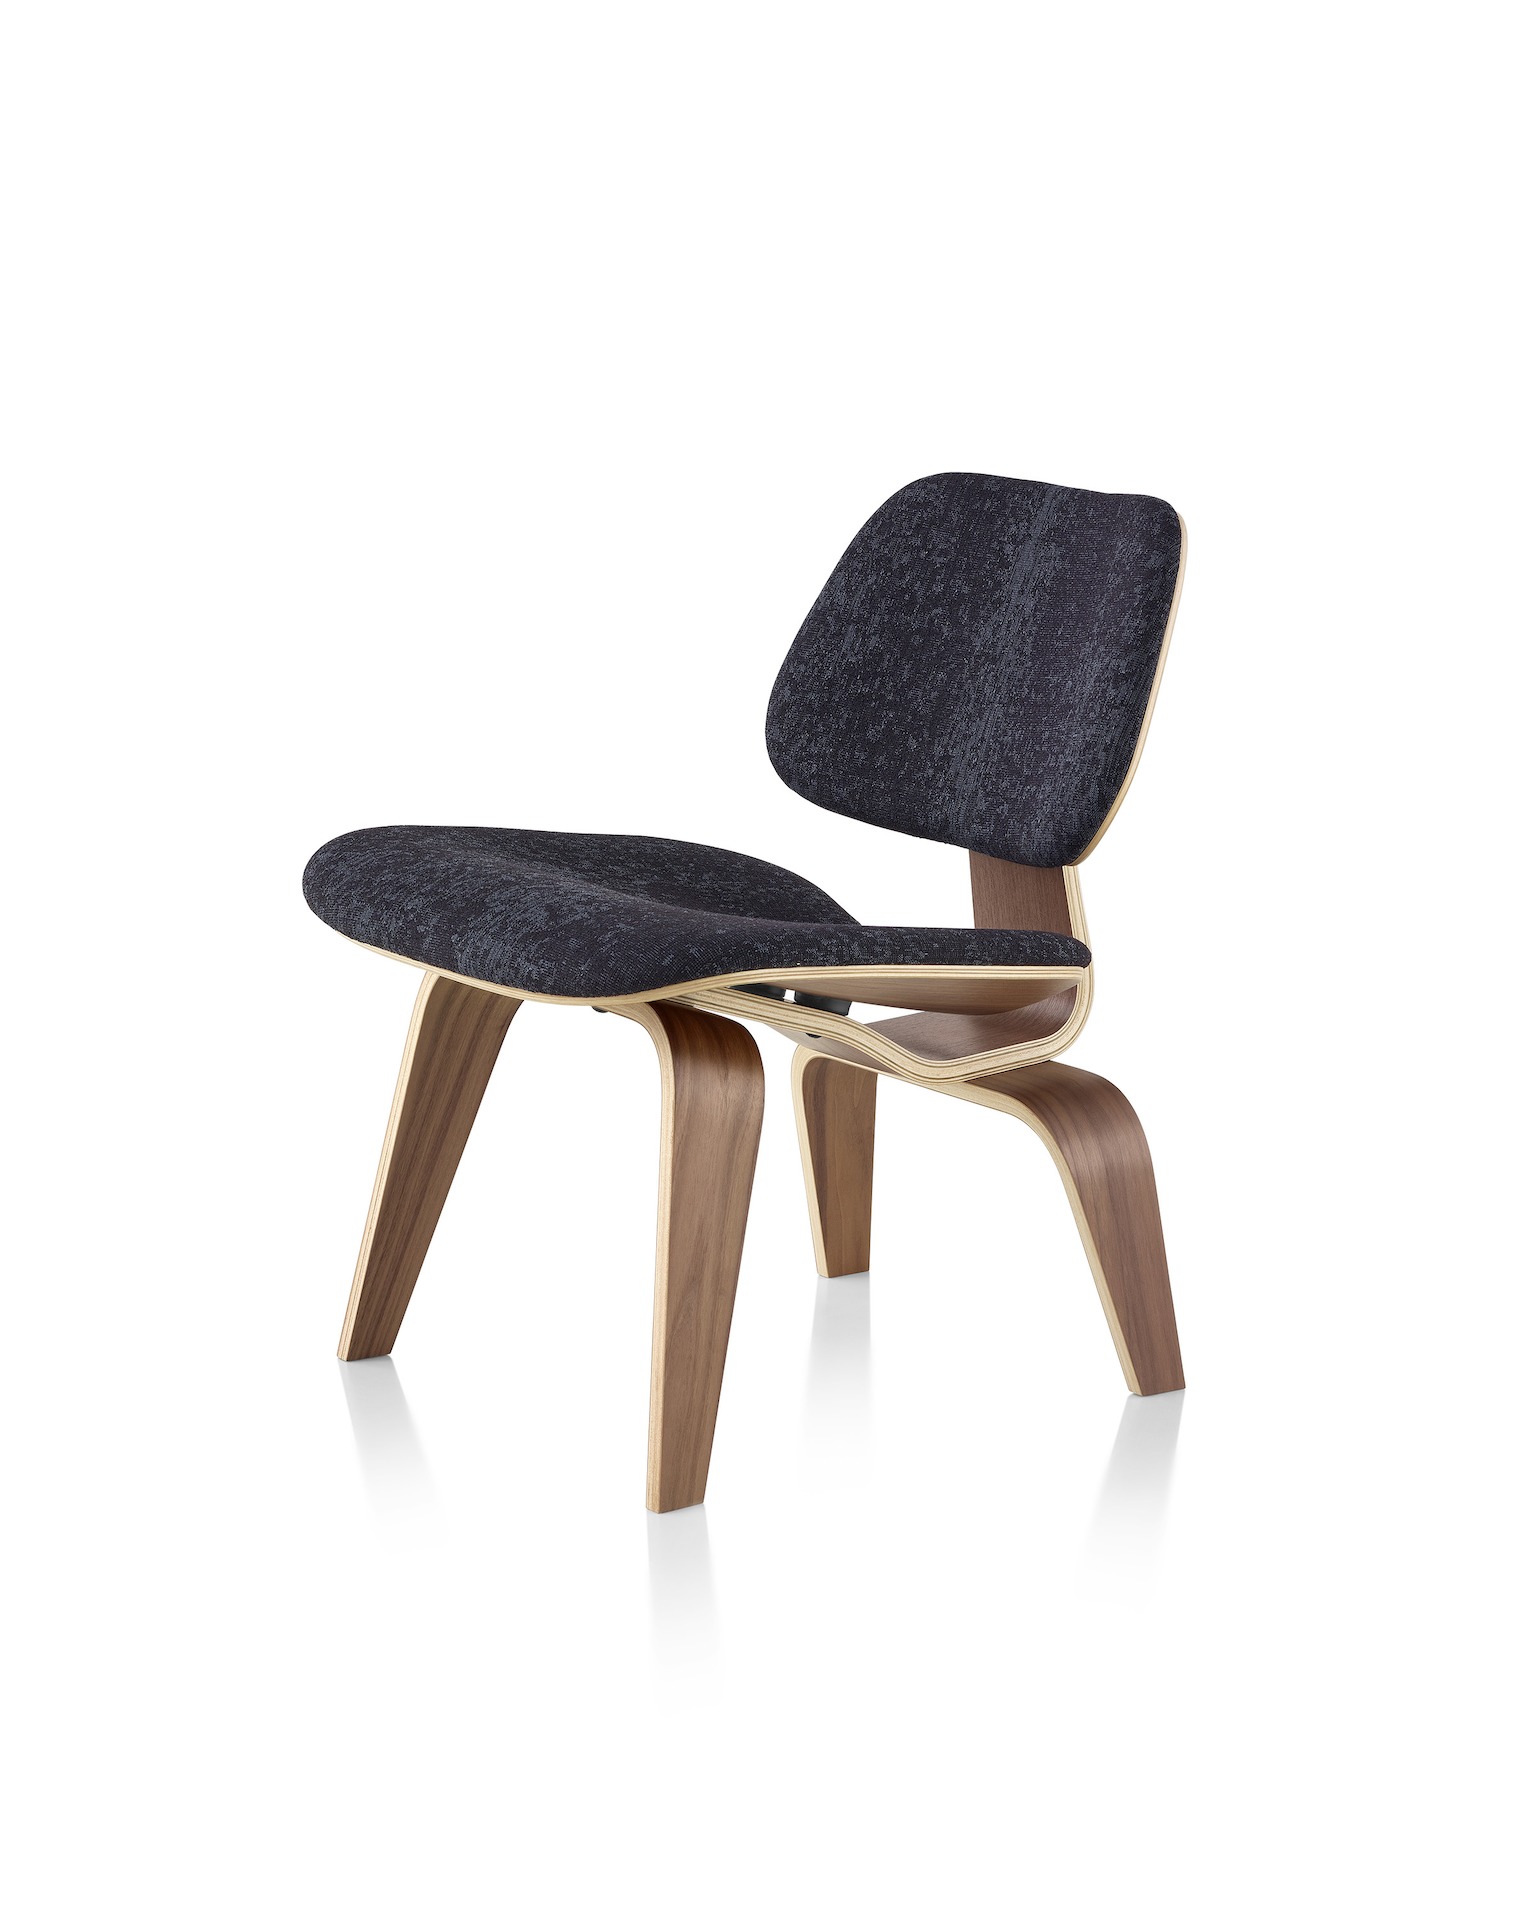 Eames Molded Plywood Dining Chair with a walnut base and black textile.